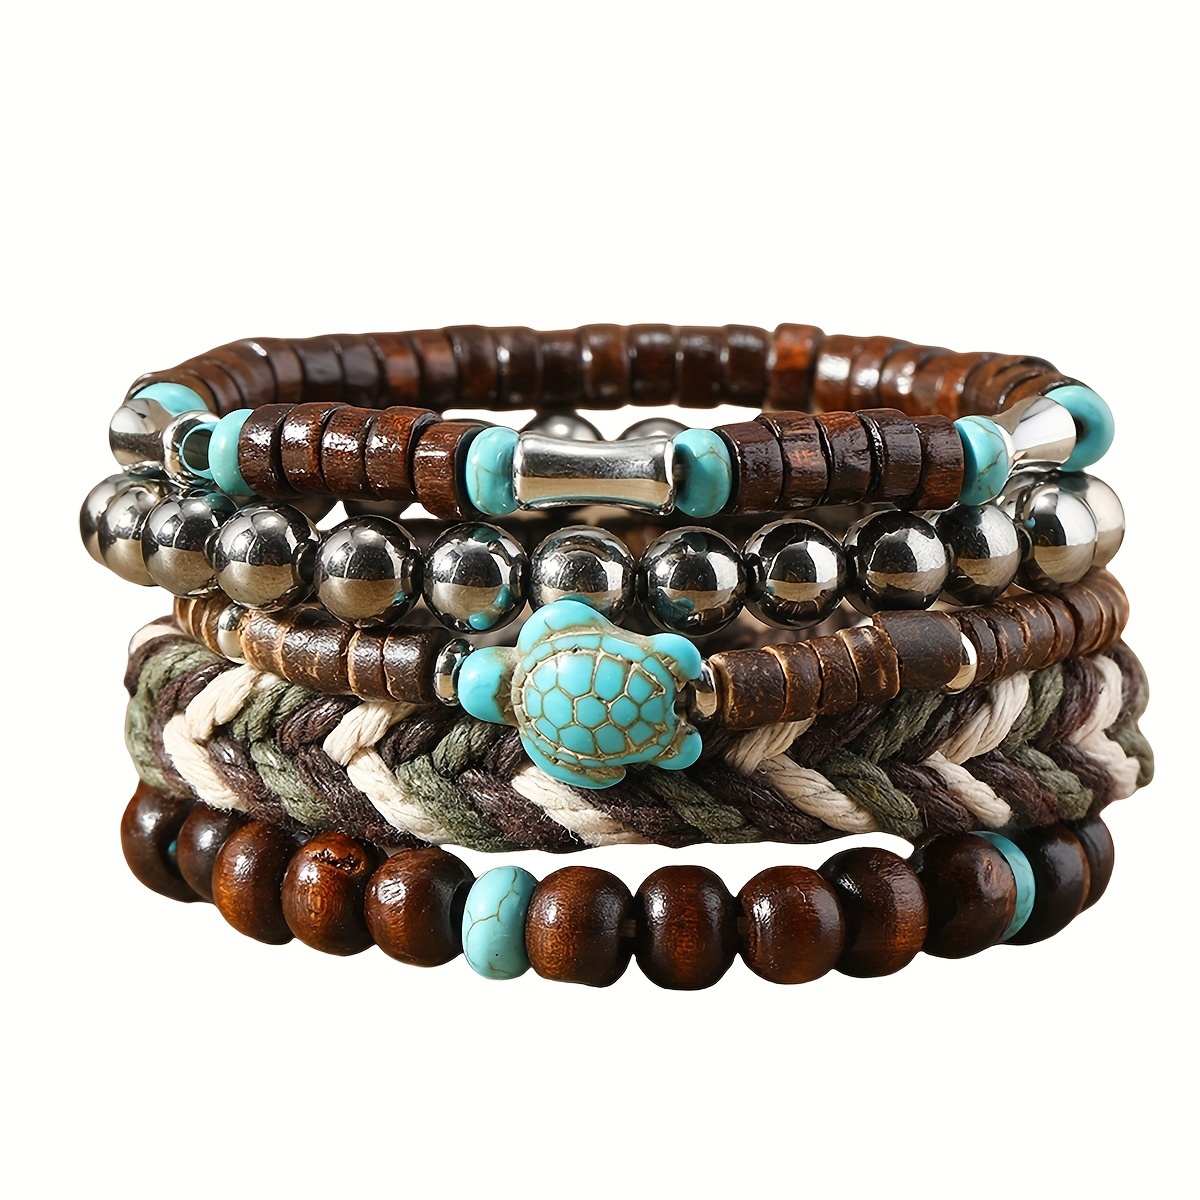 

Boho Style 5-piece Set Bracelet - Handcrafted Wooden Bead & Turtle Charm, Braided Wristband Collection, Unisex Fashion Jewelry